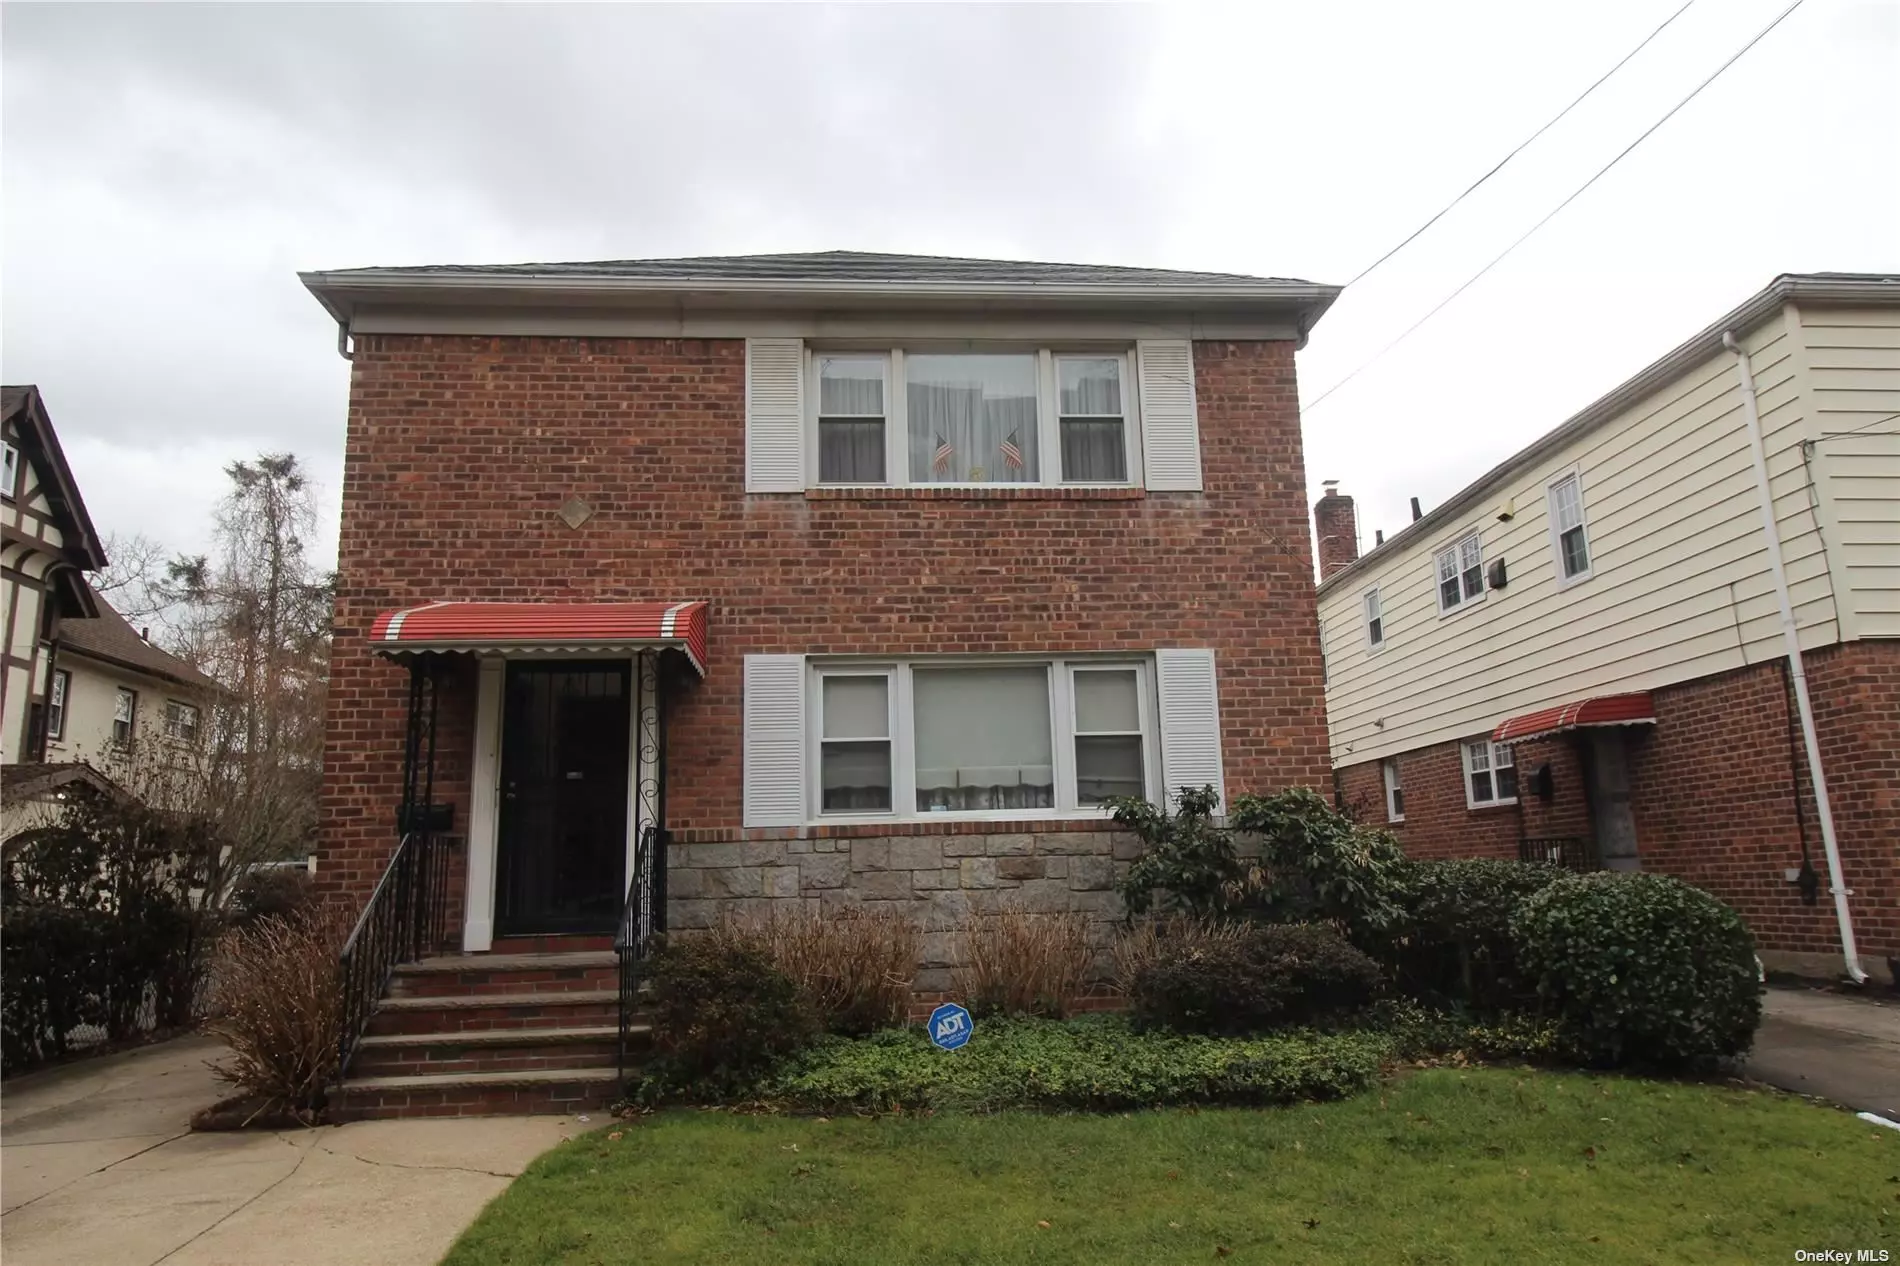 R4-1 ZONING - TWO FAMILY C/O. All Brick Residential/Commercial 3 Bedroom/1 Bathroom, LR, DR EIK (OVER) 3 Bedroom/1 Bathroom, LR, DR EIK. Finish Basement and Half Bathroom Family Room. Newer Oil Burner. Building Size 26 x 50 ( 1, 300 sq. ft. per floor ). LOT SIZE 41.33 x 137.50 ( 5, 683 sq. ft. ) Income Producing Home! Excellent Location. Minutes to Downtown Flushing. Bus Stop on Corner; Near Shopping. Large Back Yard can be Converted to a 8 Car Parking.